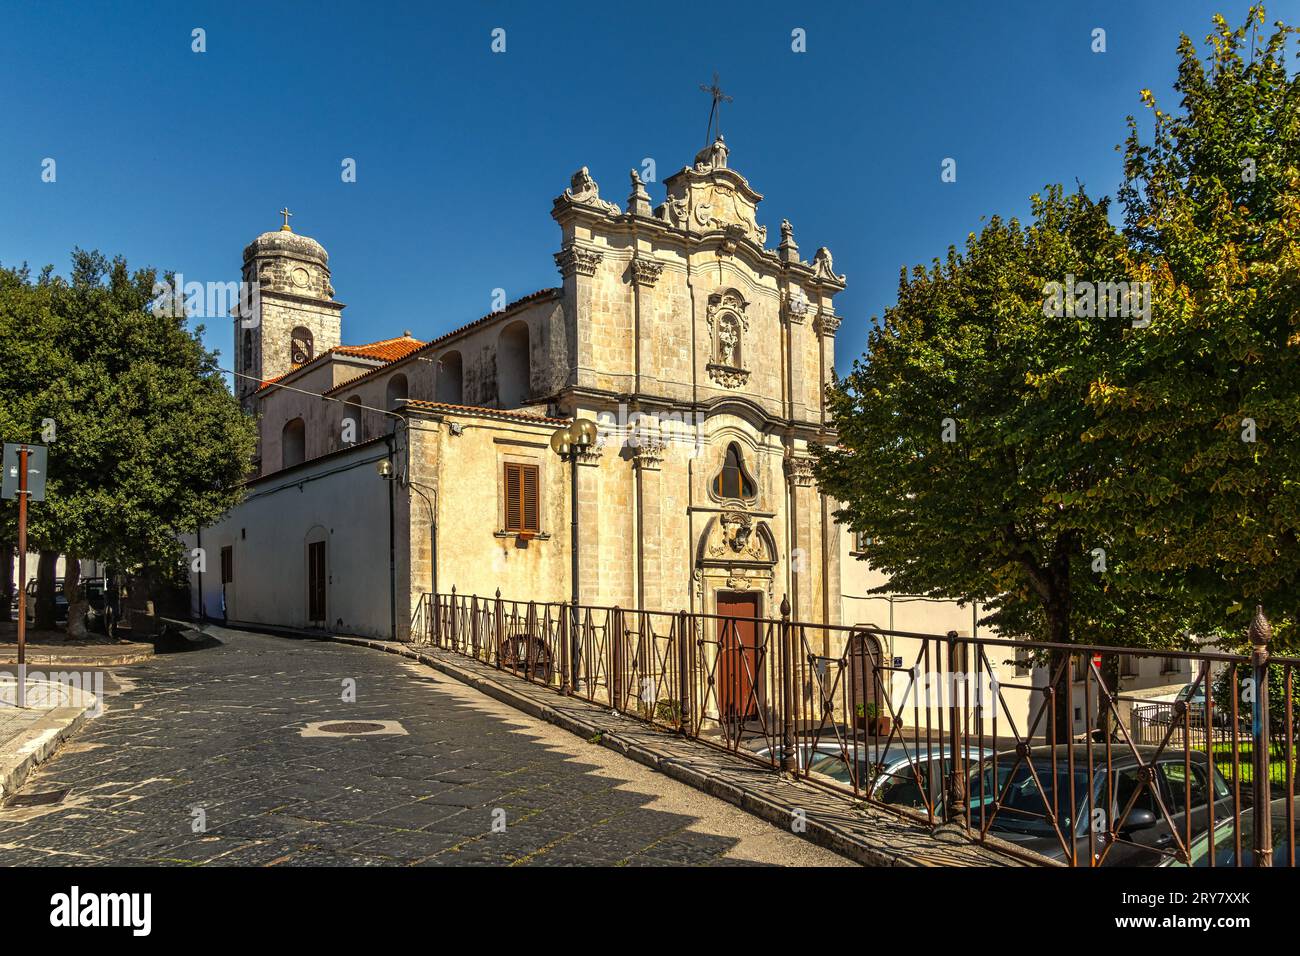 The facade of the eighteenth-century church dedicated to Santa Maria del Carmine in Monte Sant'Angelo. Monte Sant'Angelo, province of Foggia, Italy Stock Photo